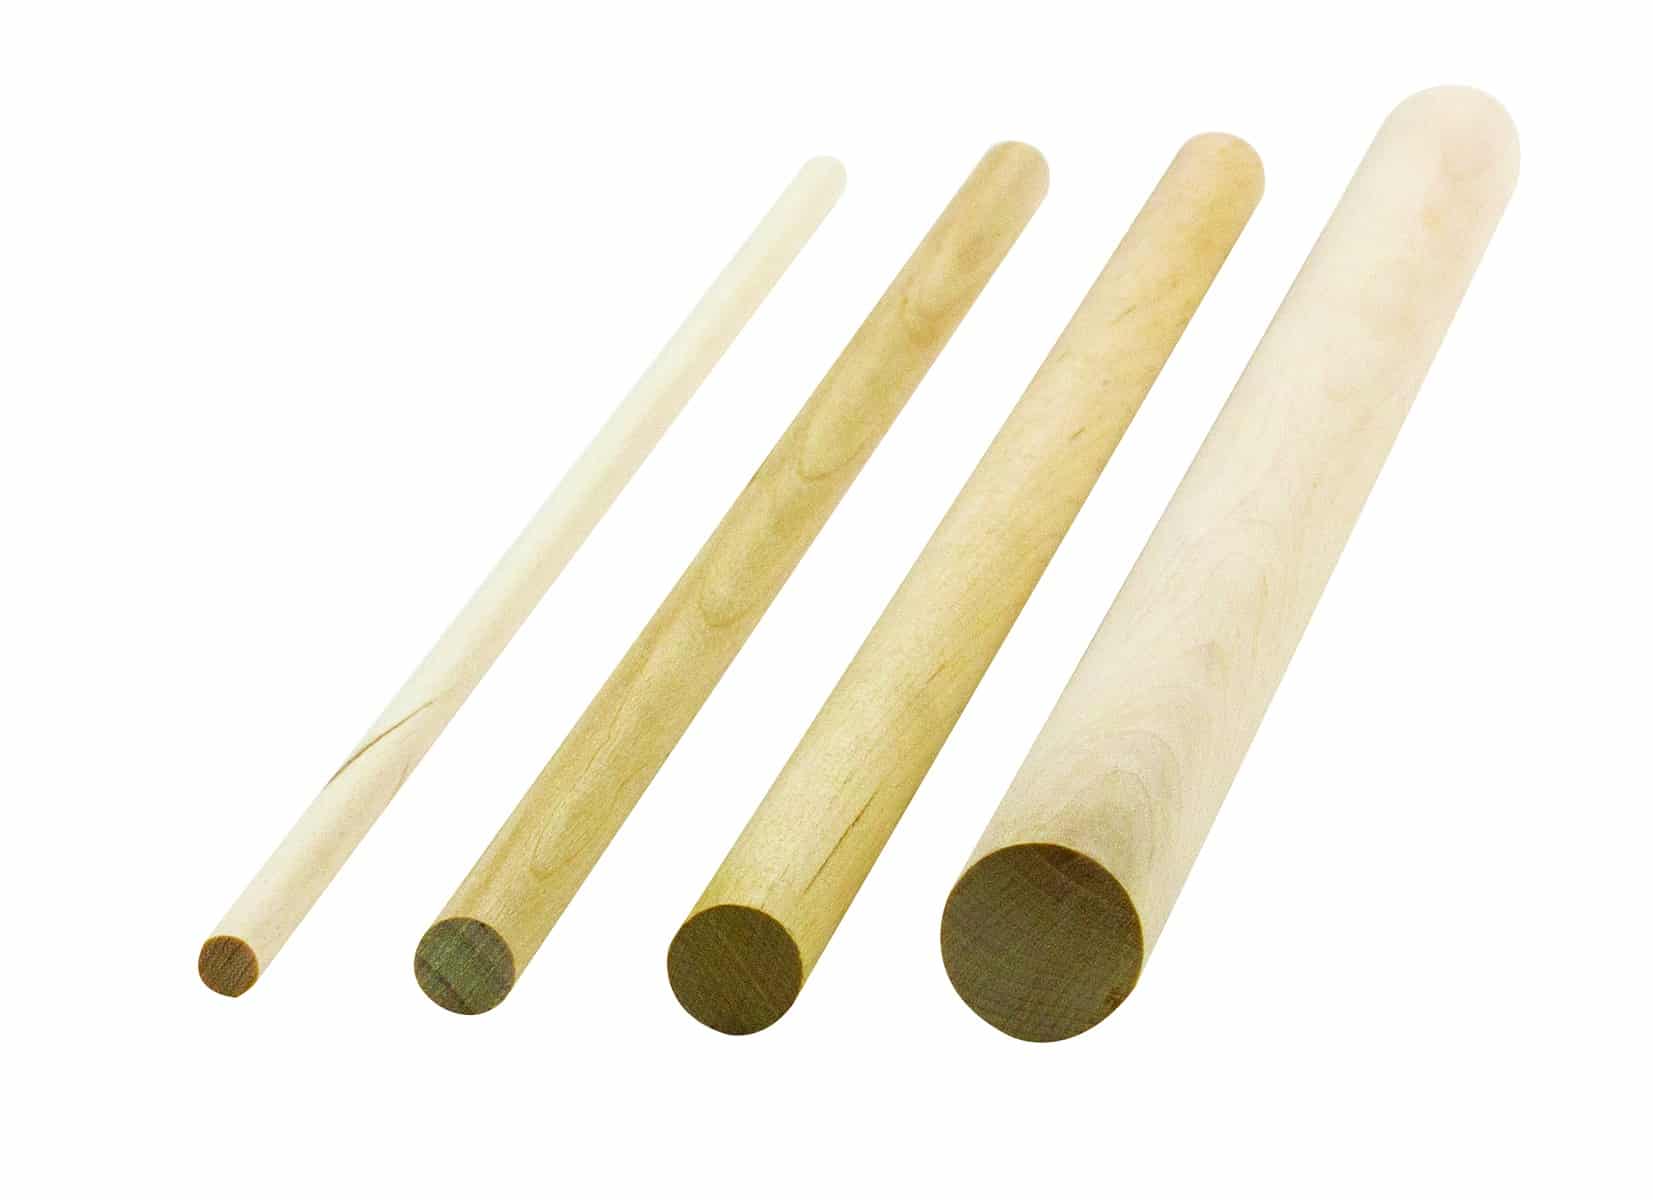 Hygloss Products 10-Pack Wooden Dowel Rods, Inc 3/8-Inch x 12-Inch 